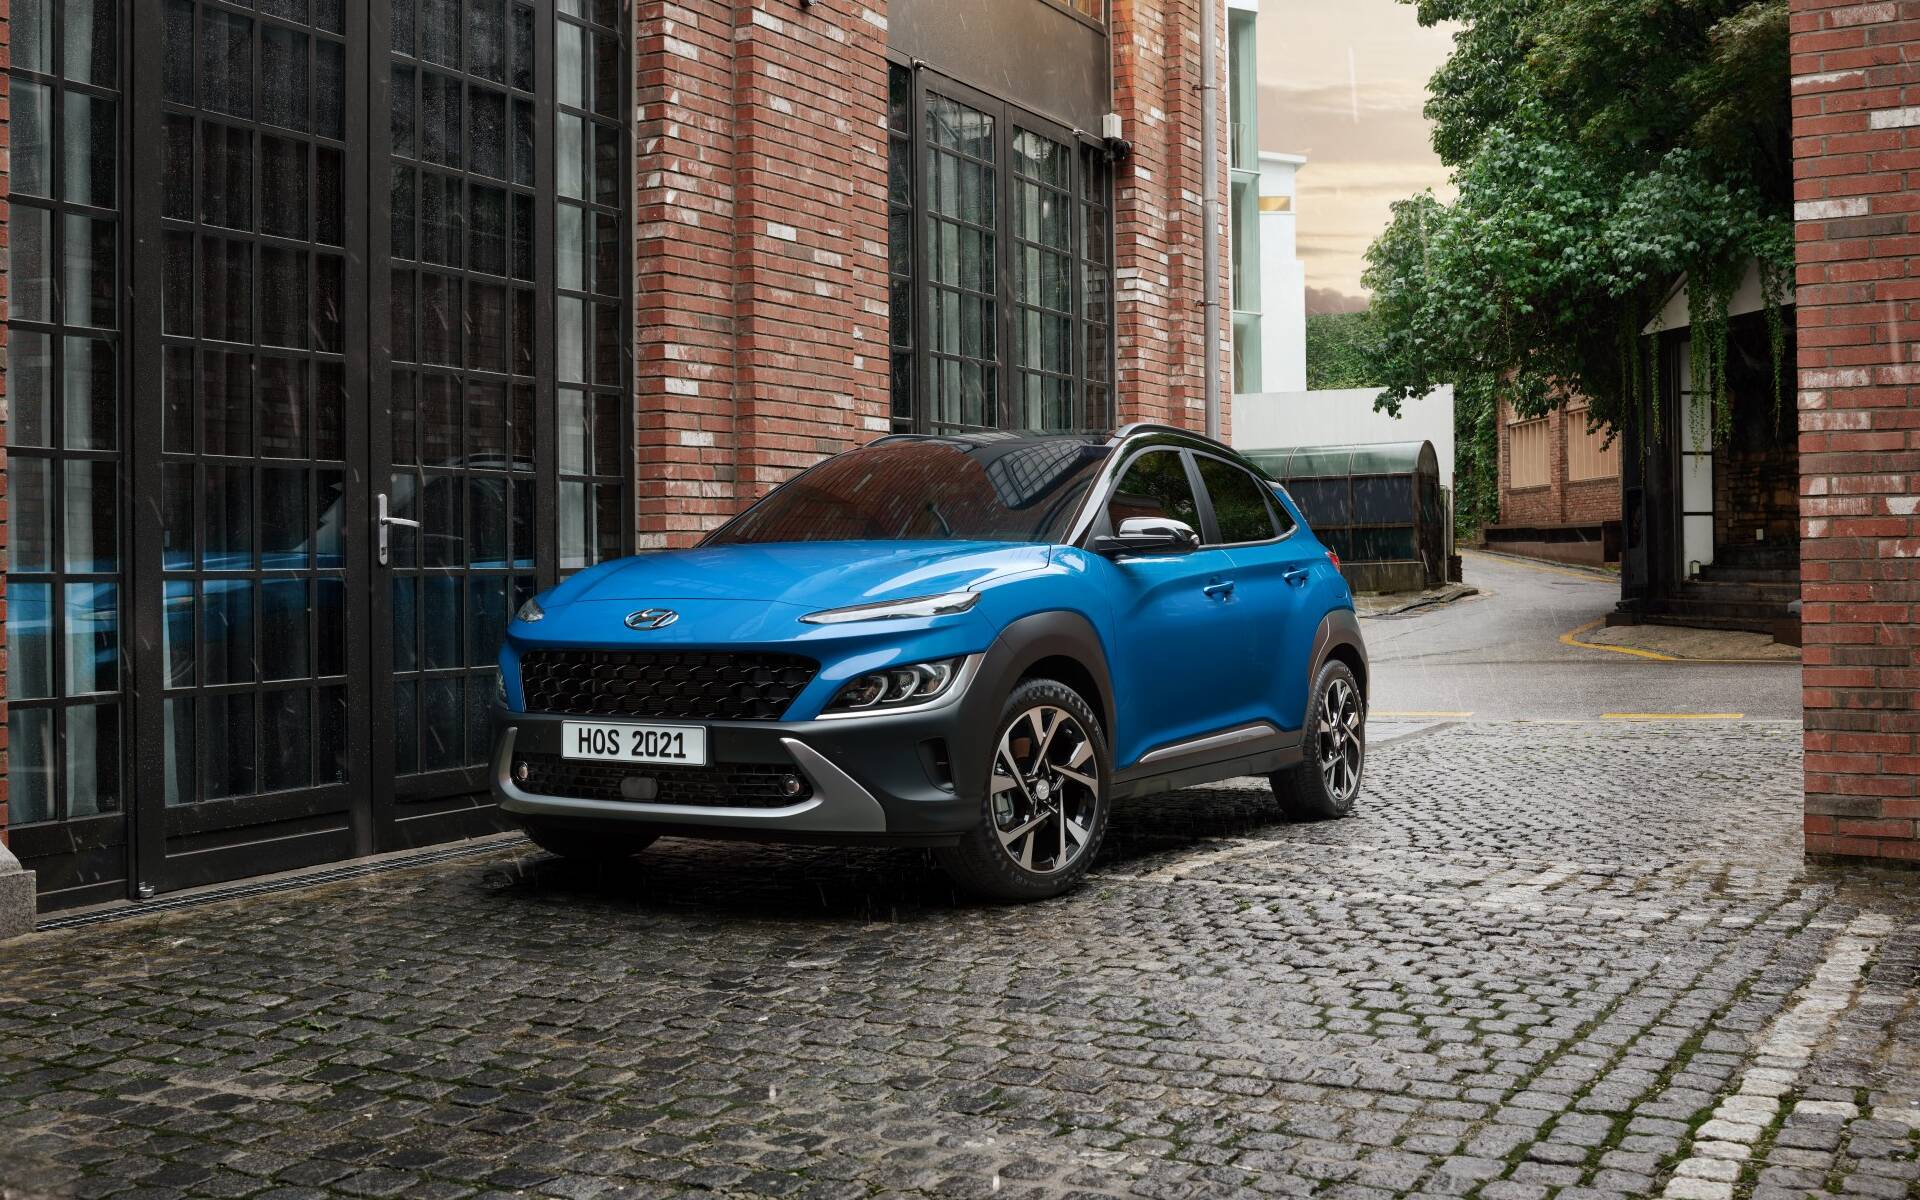 2022 Hyundai Kona Officially Unveiled With New Looks, N Line Model - The  Car Guide